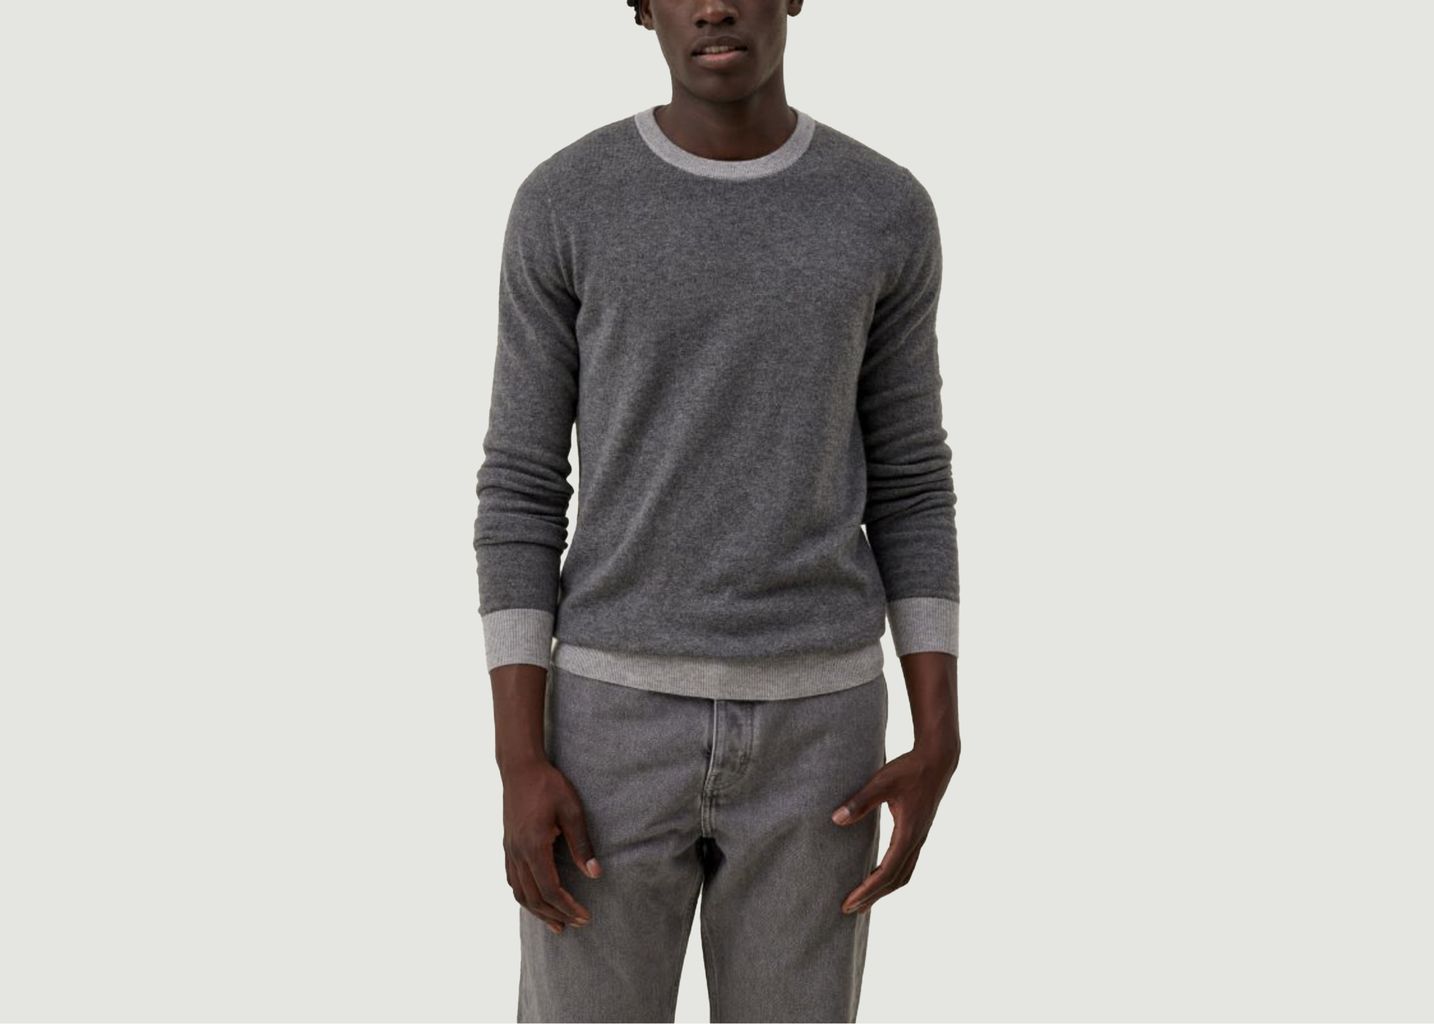 Timal cashmere sweater - Hircus